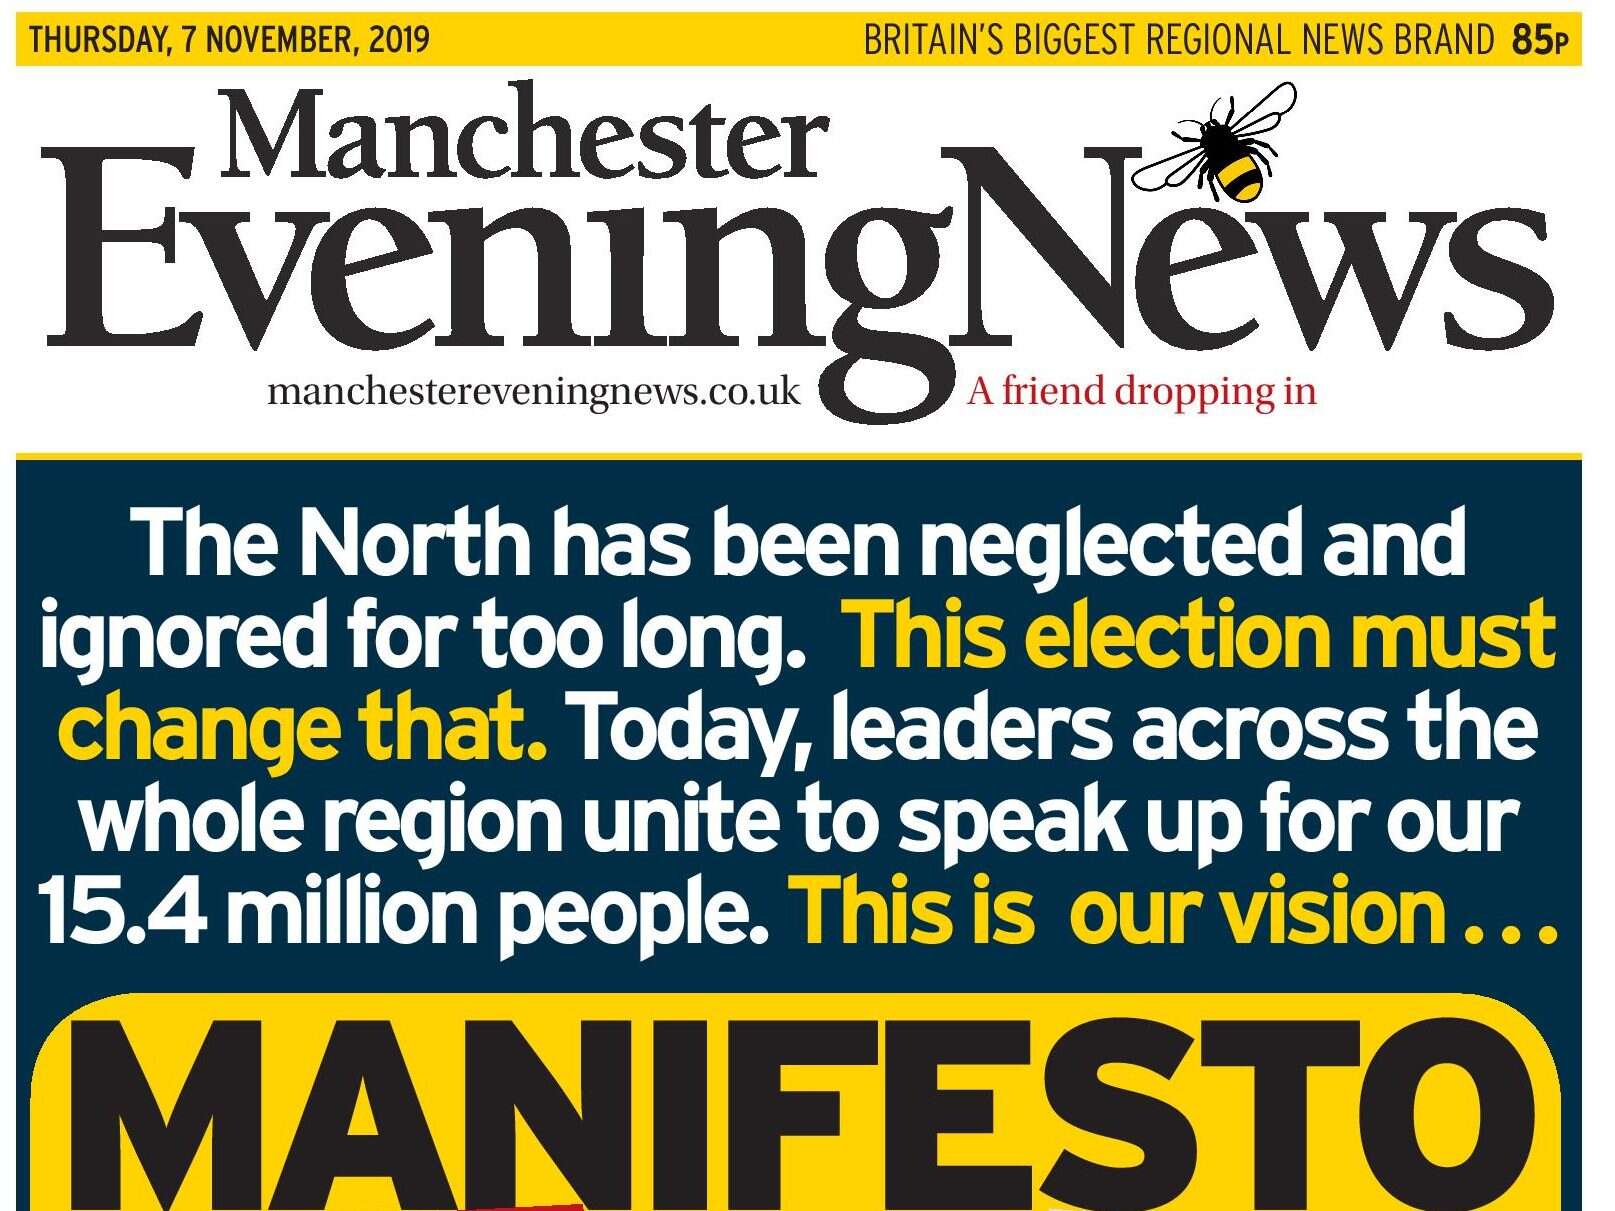 Reach, JPI and Newsquest dailies team up to present election 'manifesto for the north'